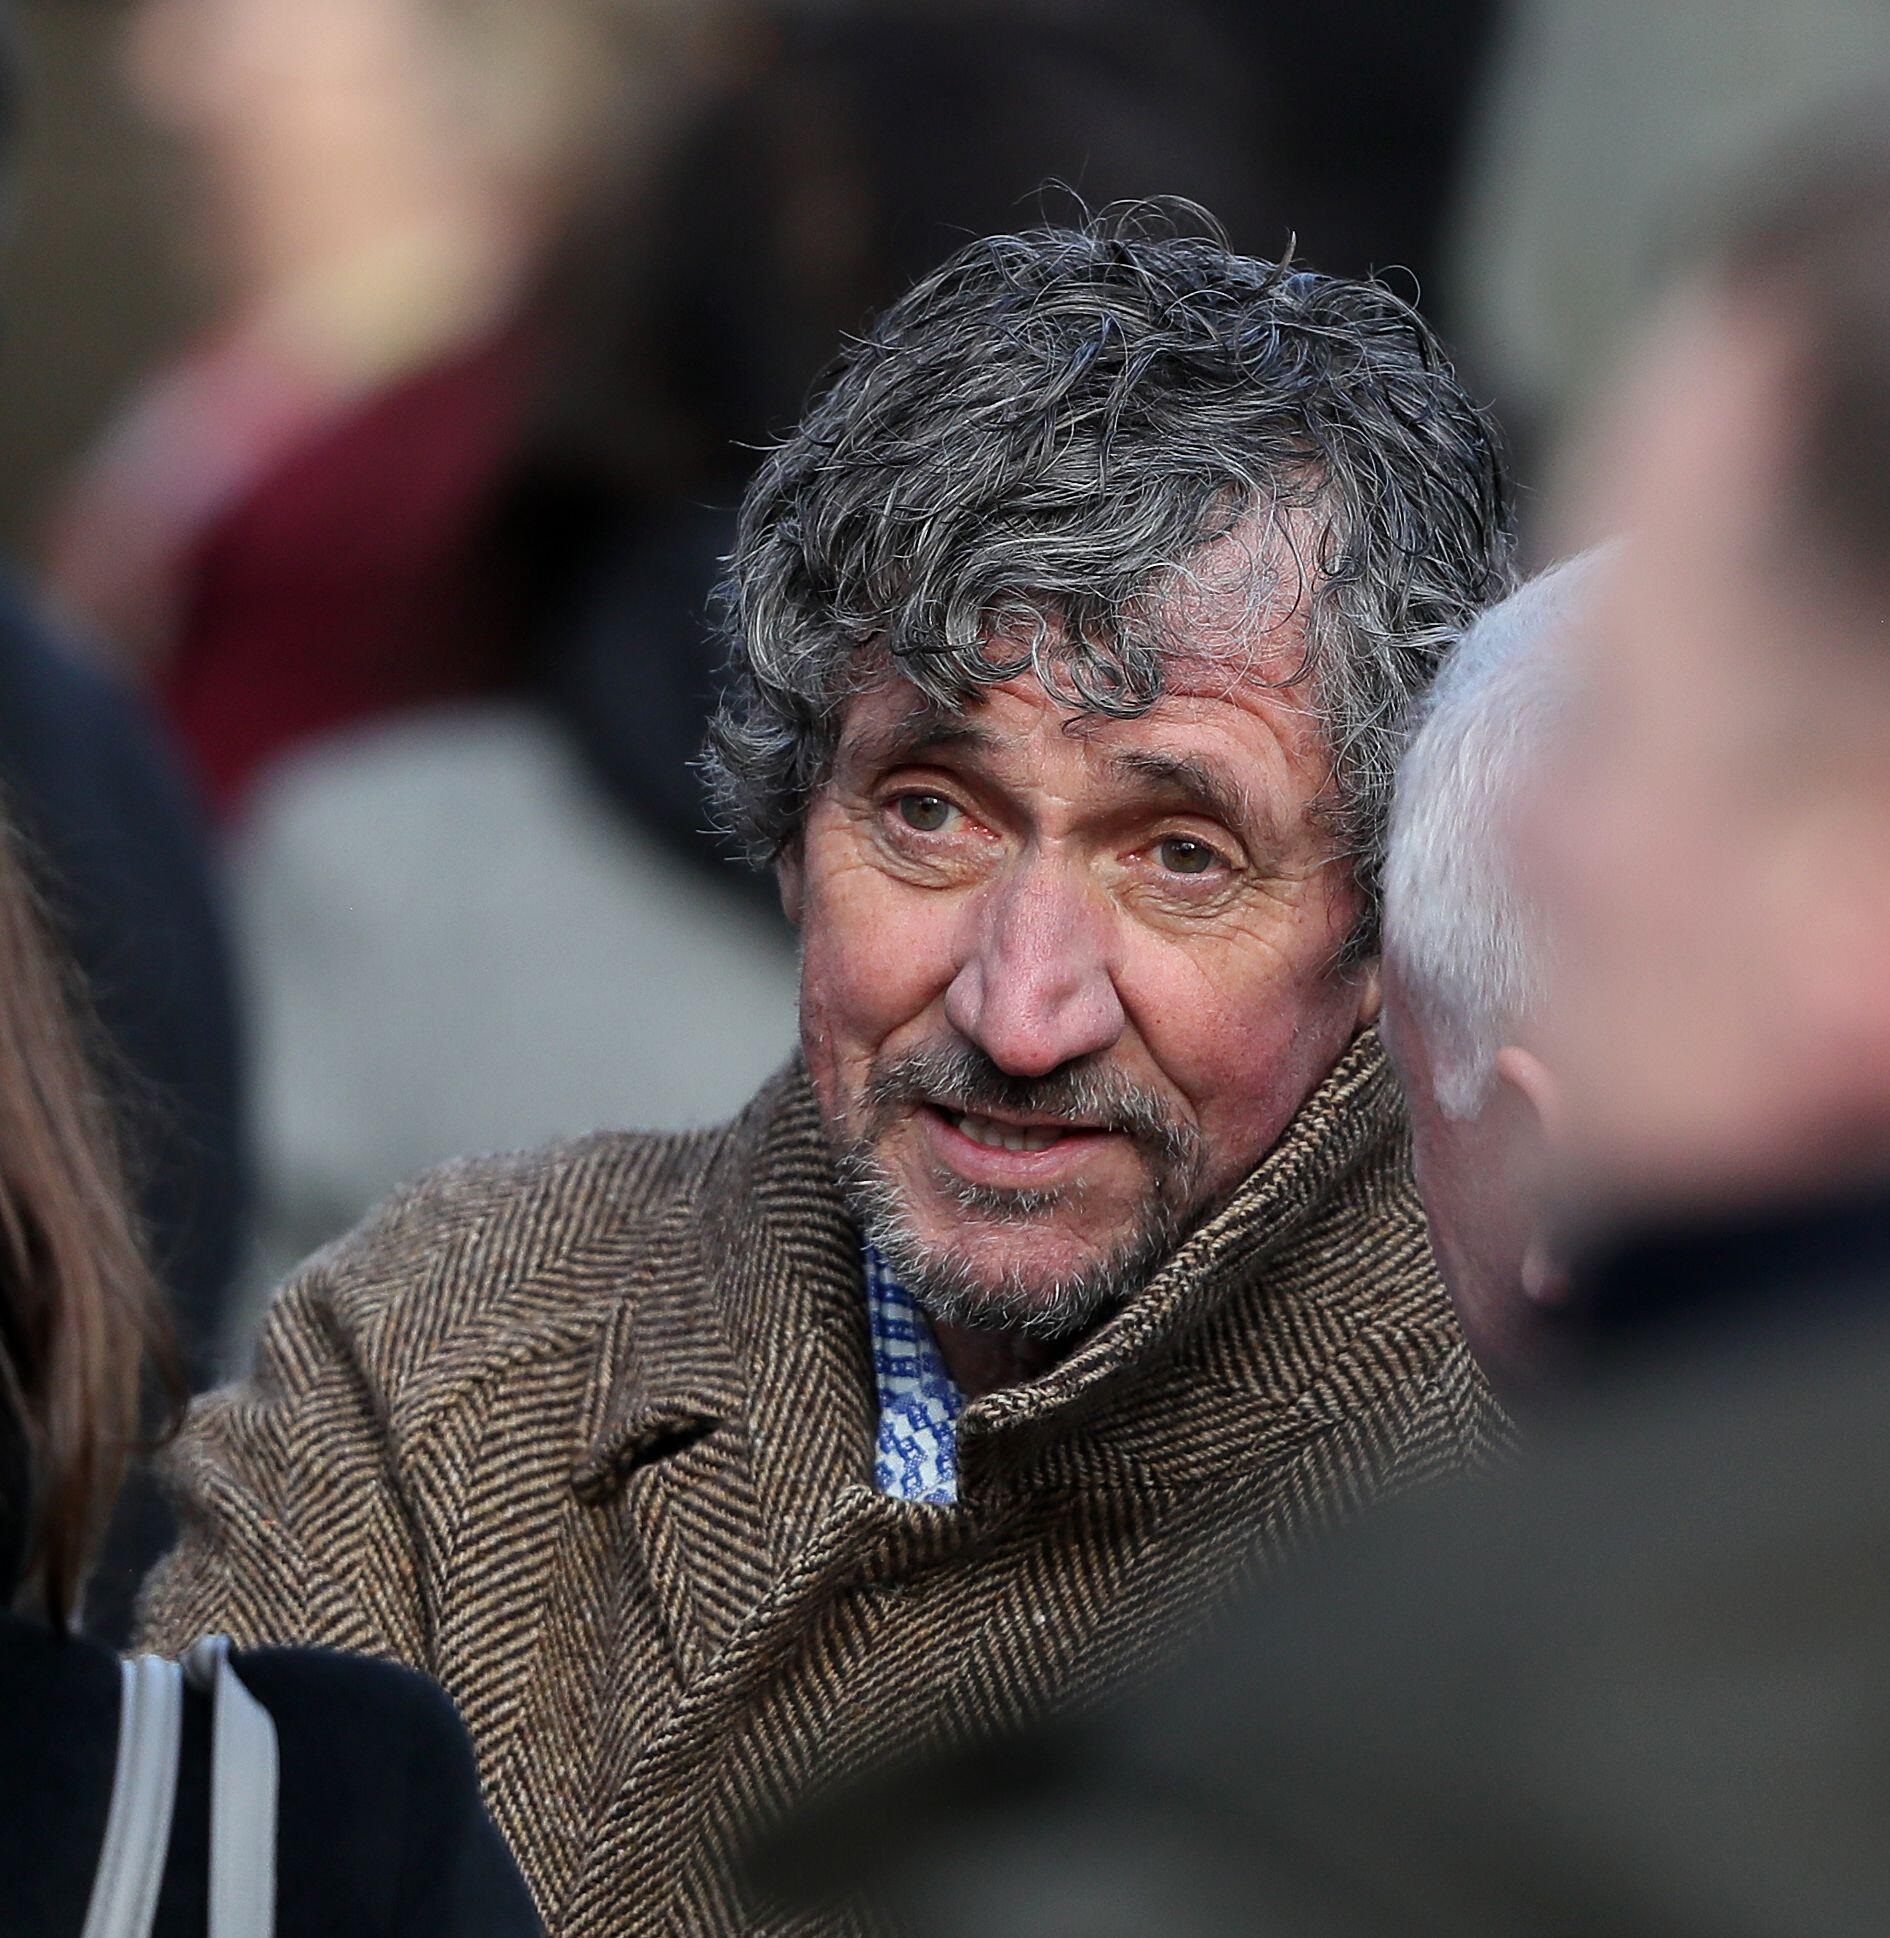 Former RTE broadcaster Charlie Bird is seen following the funeral of journalist and broadcaster Keelin Shanley in Glenageary, Co Dublin in February 2020.